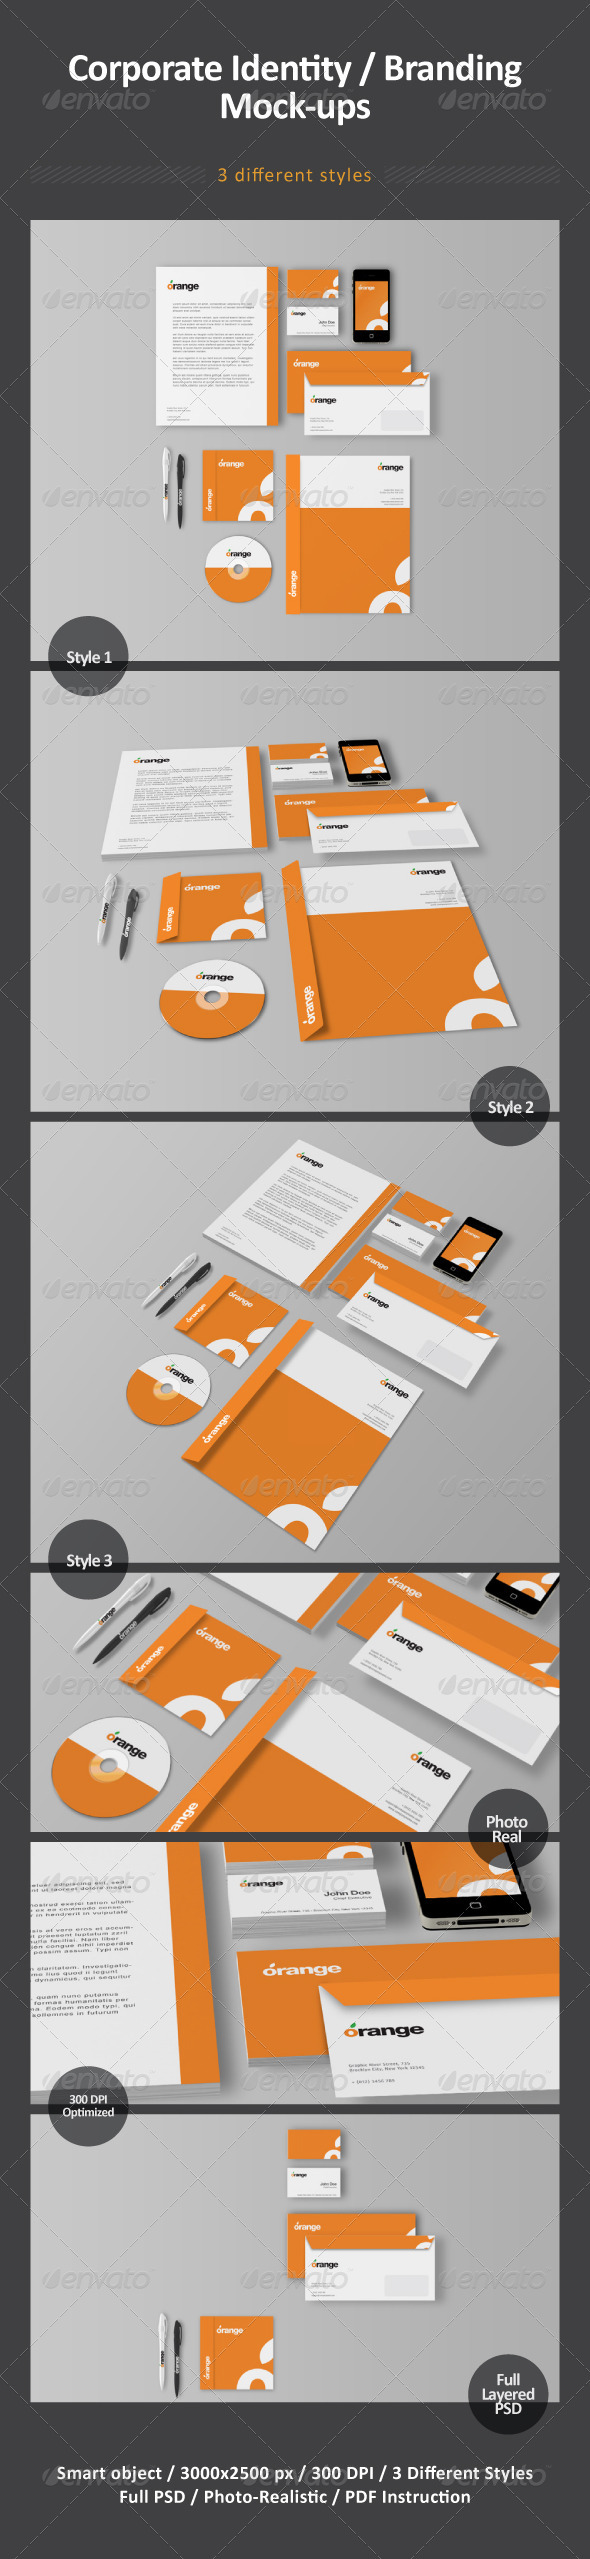 Download Corporate Identity / Branding Mock-ups by CodeID | GraphicRiver